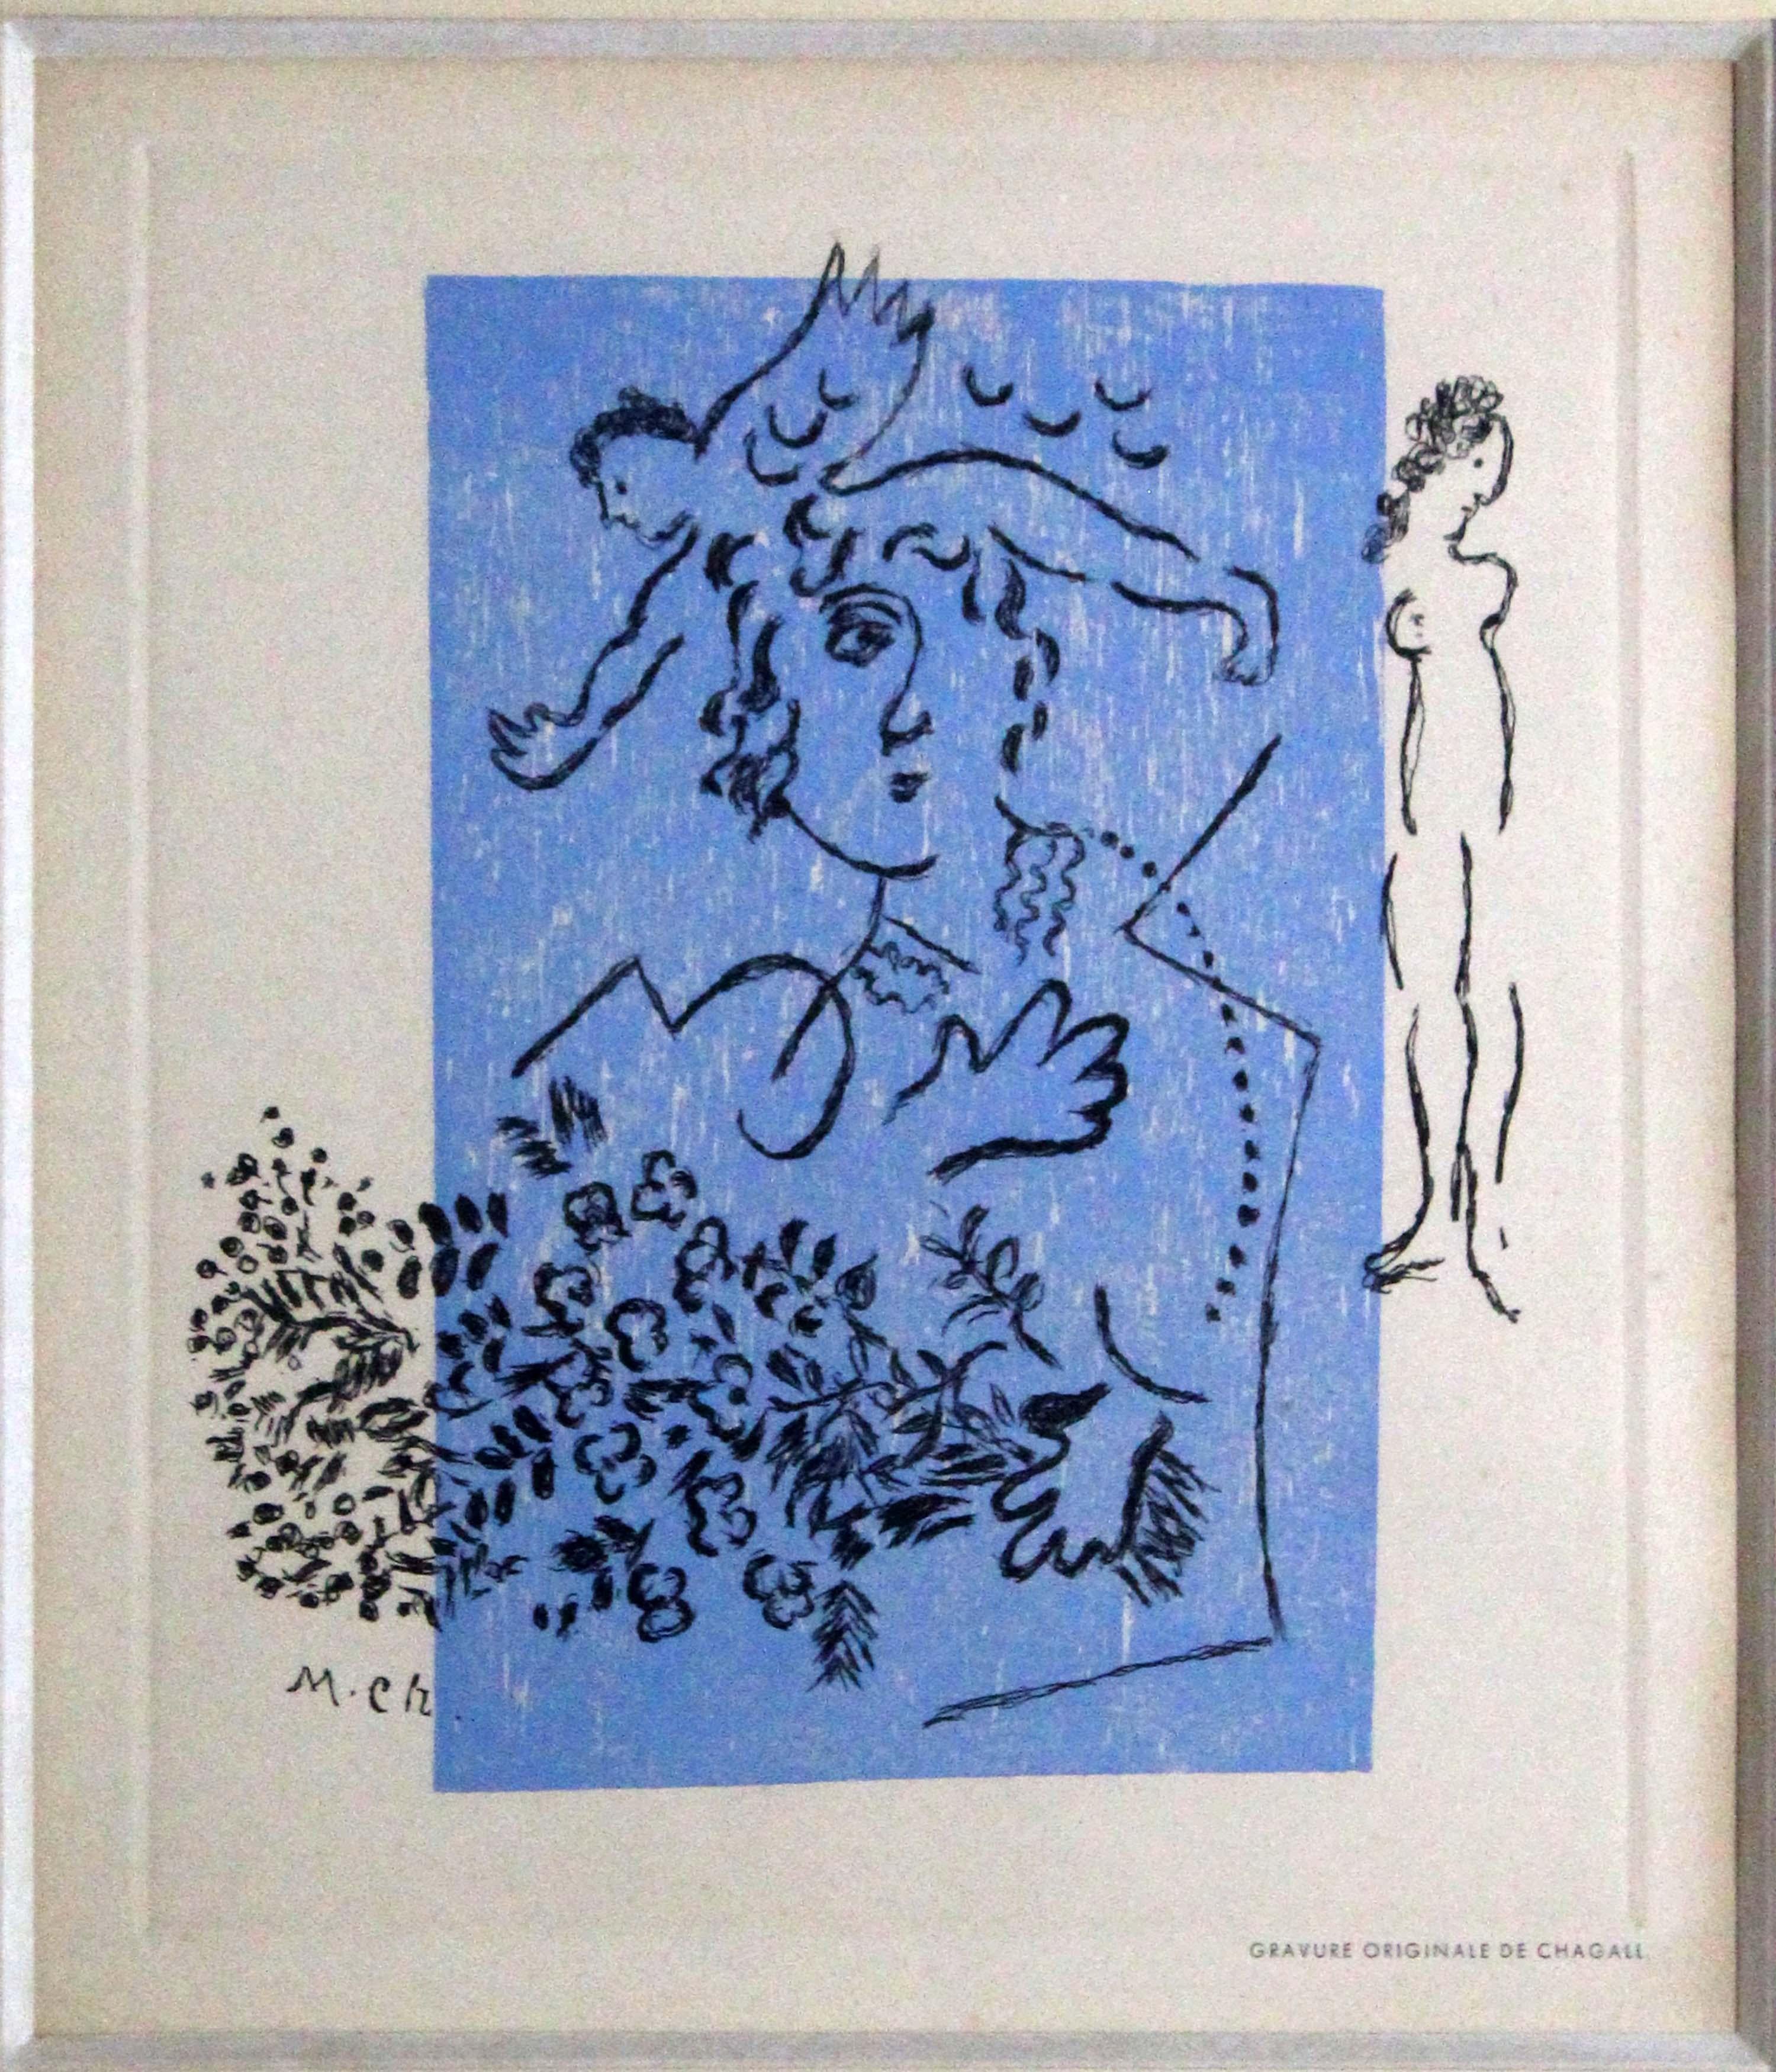 A romantic study in blue, gravure originale (original etching) titled Femme et Agne (Woman and Angel) by Marc Chagall. Signed in plate on Arches vellum. Chagall did this etching for a greeting card in 1963. This allows a rare opportunity to own